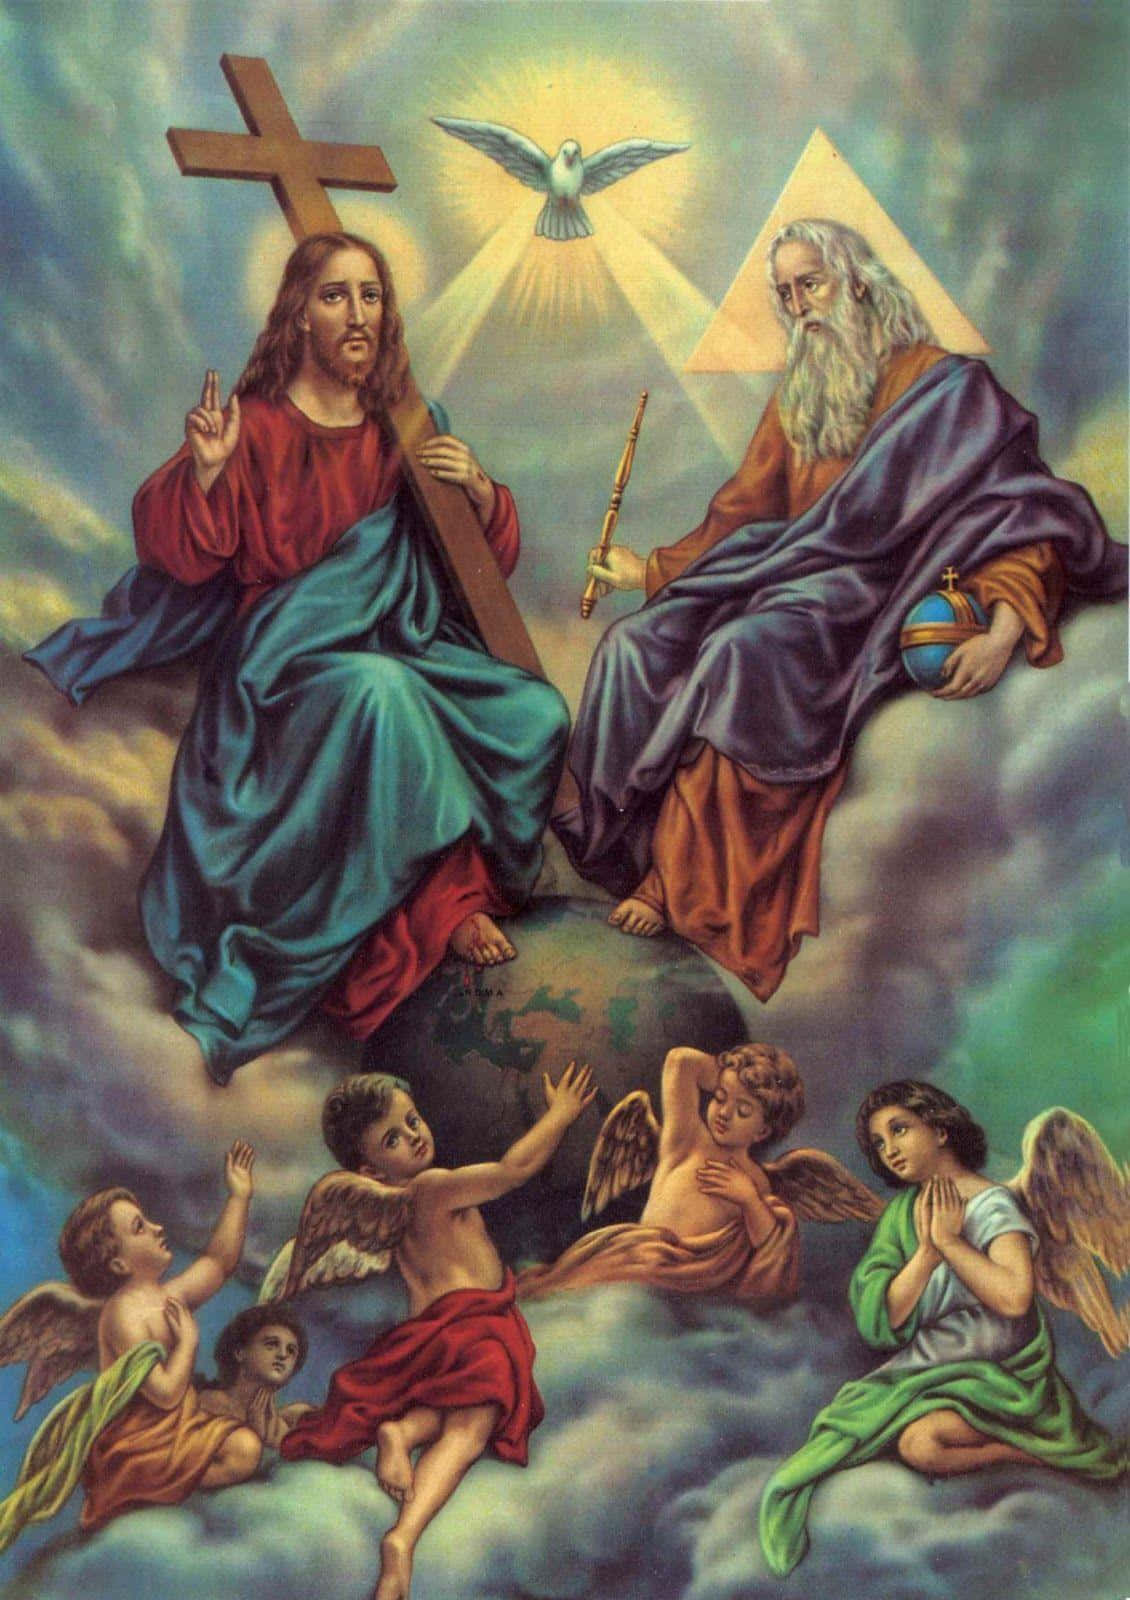 The Holy Trinity depicted in a stunning, artistic representation Wallpaper